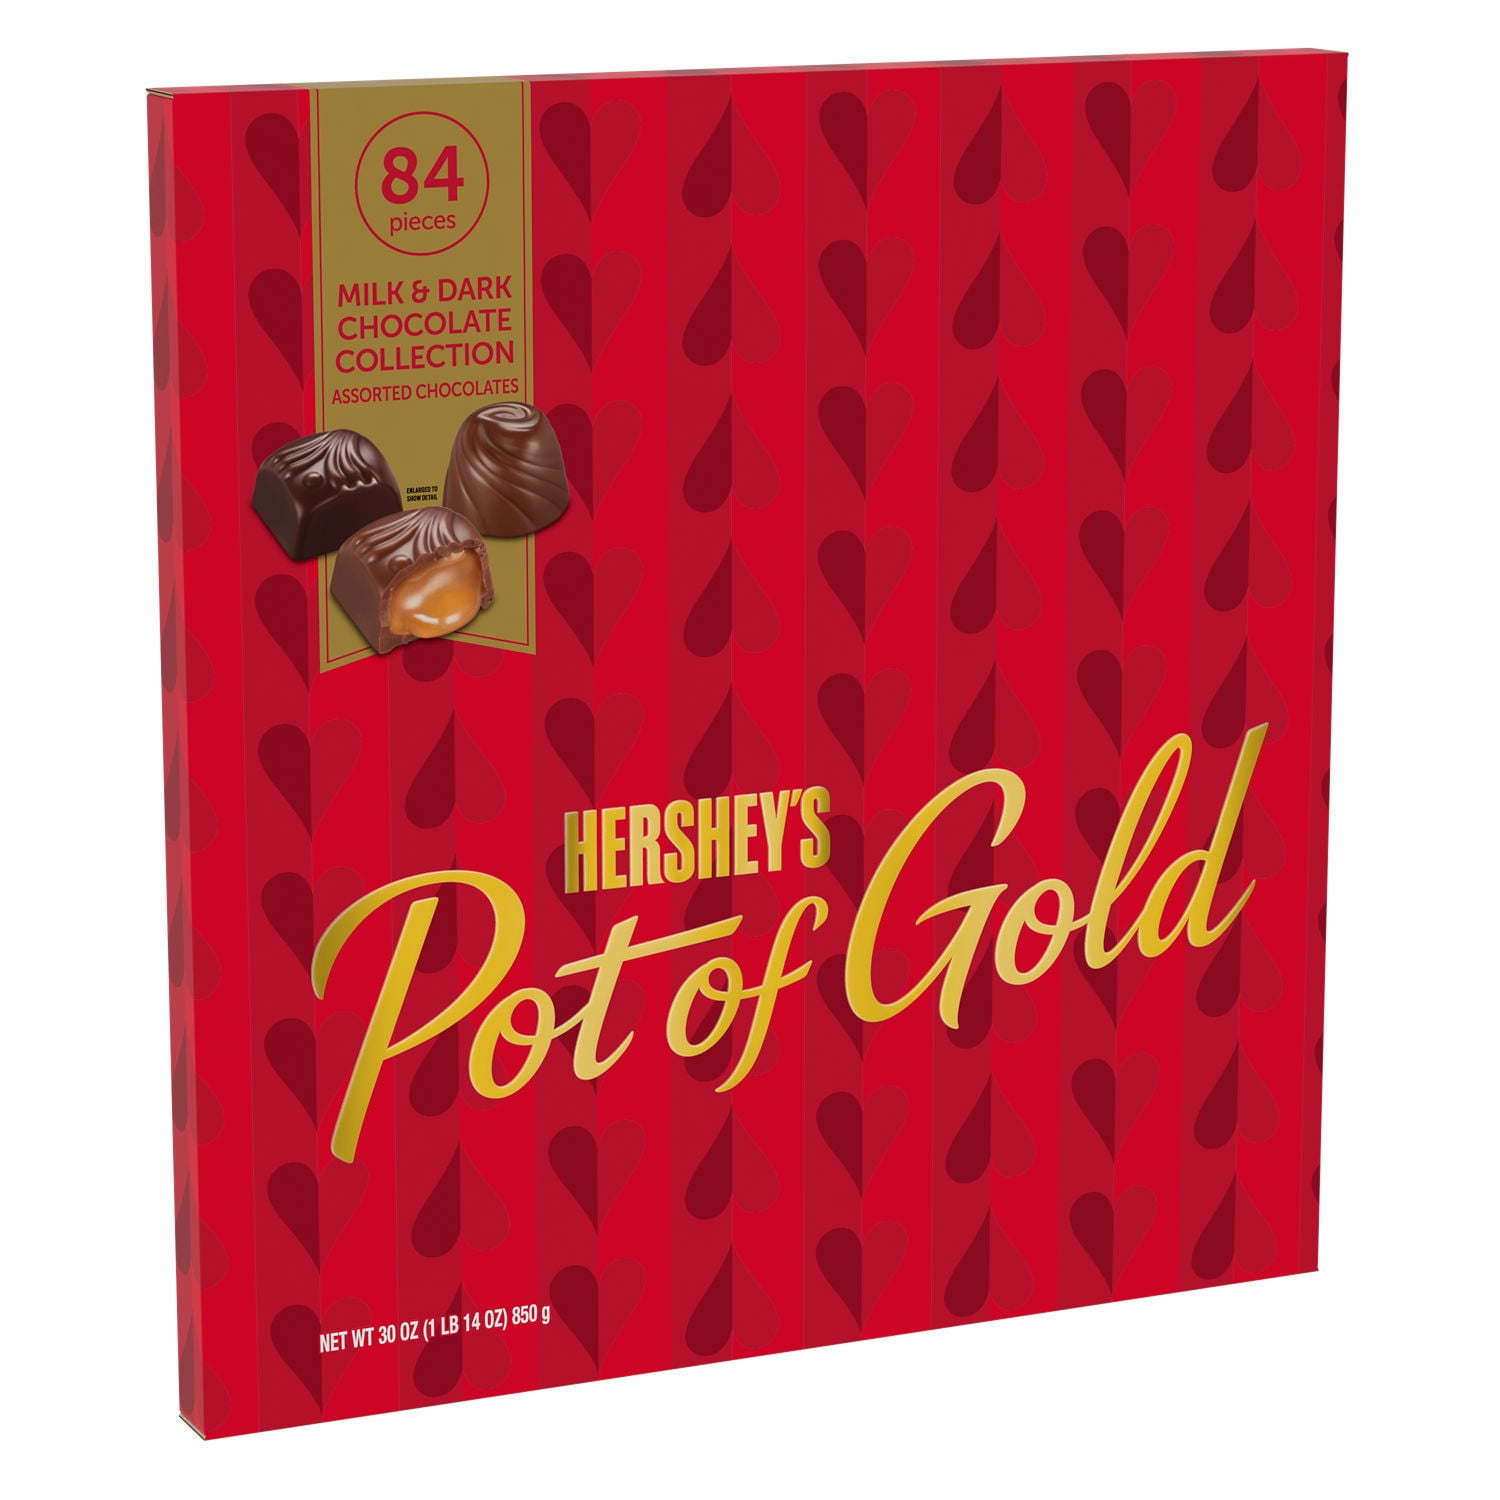 HERSHEY'S, POT OF GOLD Milk and Dark Chocolate Collection Assorted Chocolate Candy, Valentine's Day, 30 oz, Bulk Gift Box (84 Pieces)